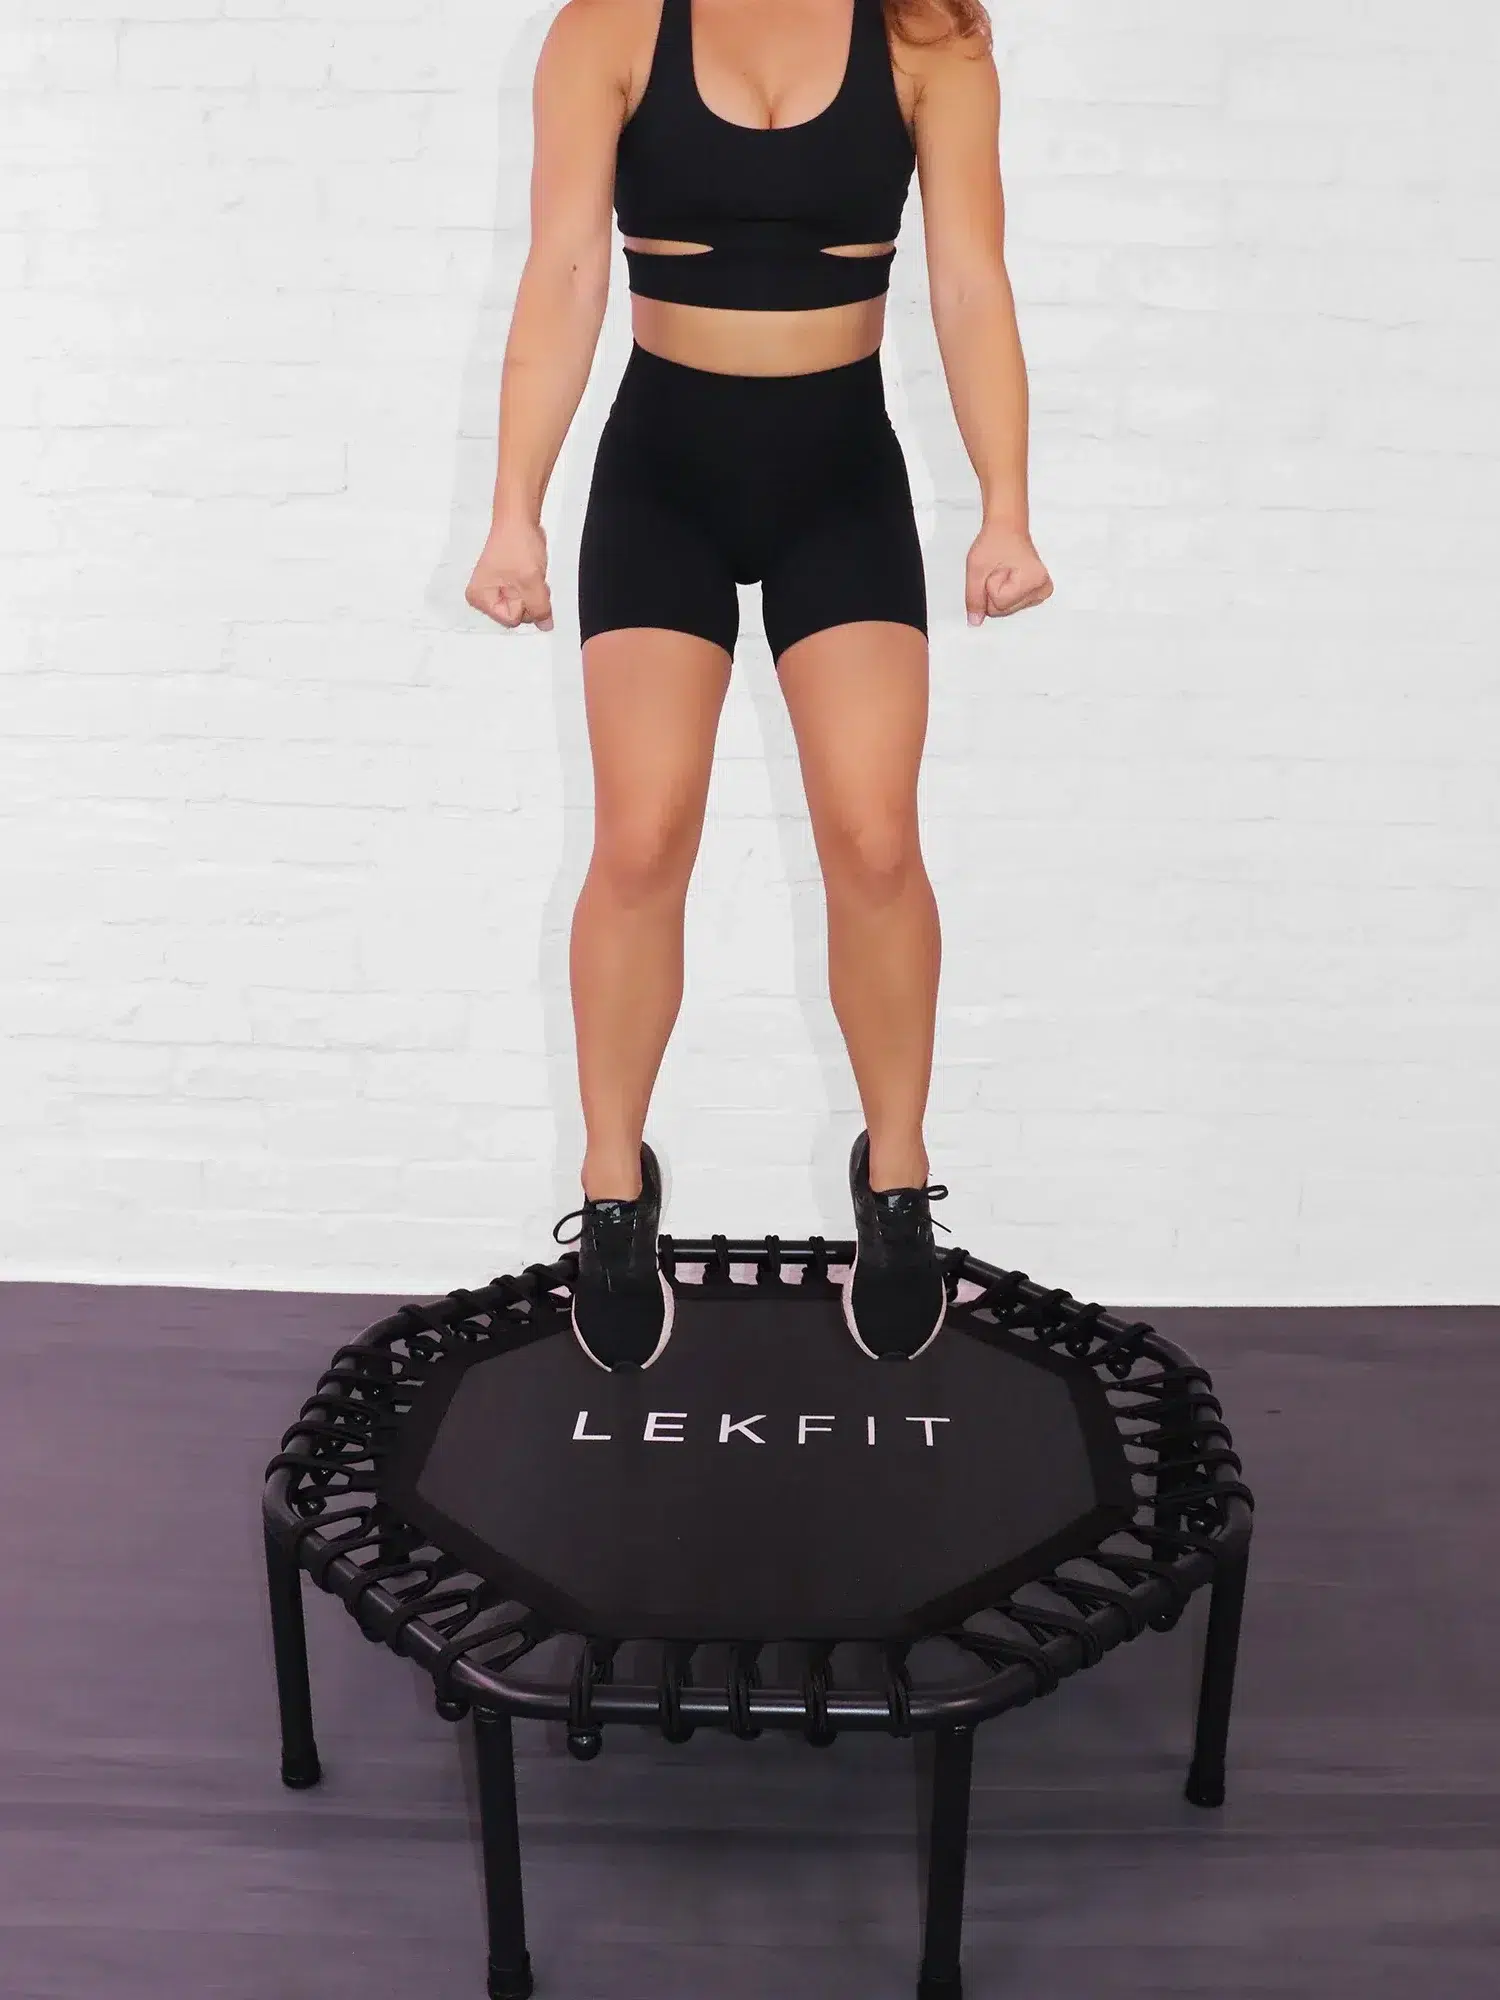 A model with a rebounder trampoline from Lekfit